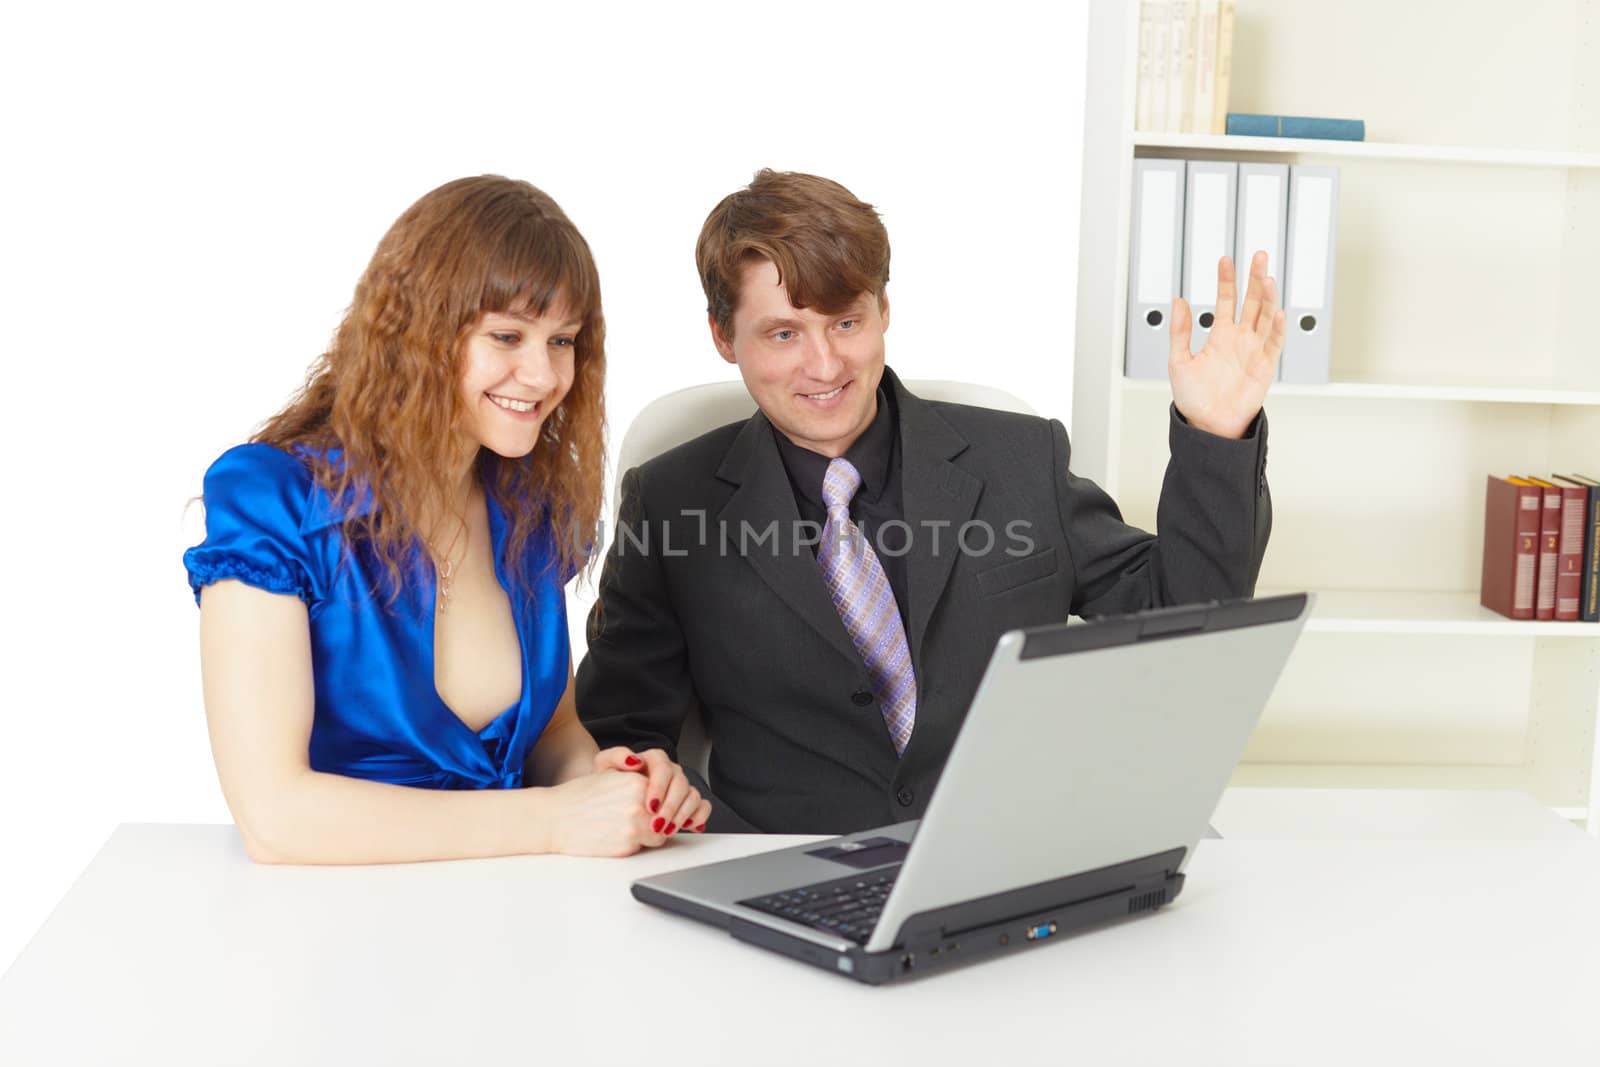 Man and woman are happy looking at a laptop screen in office